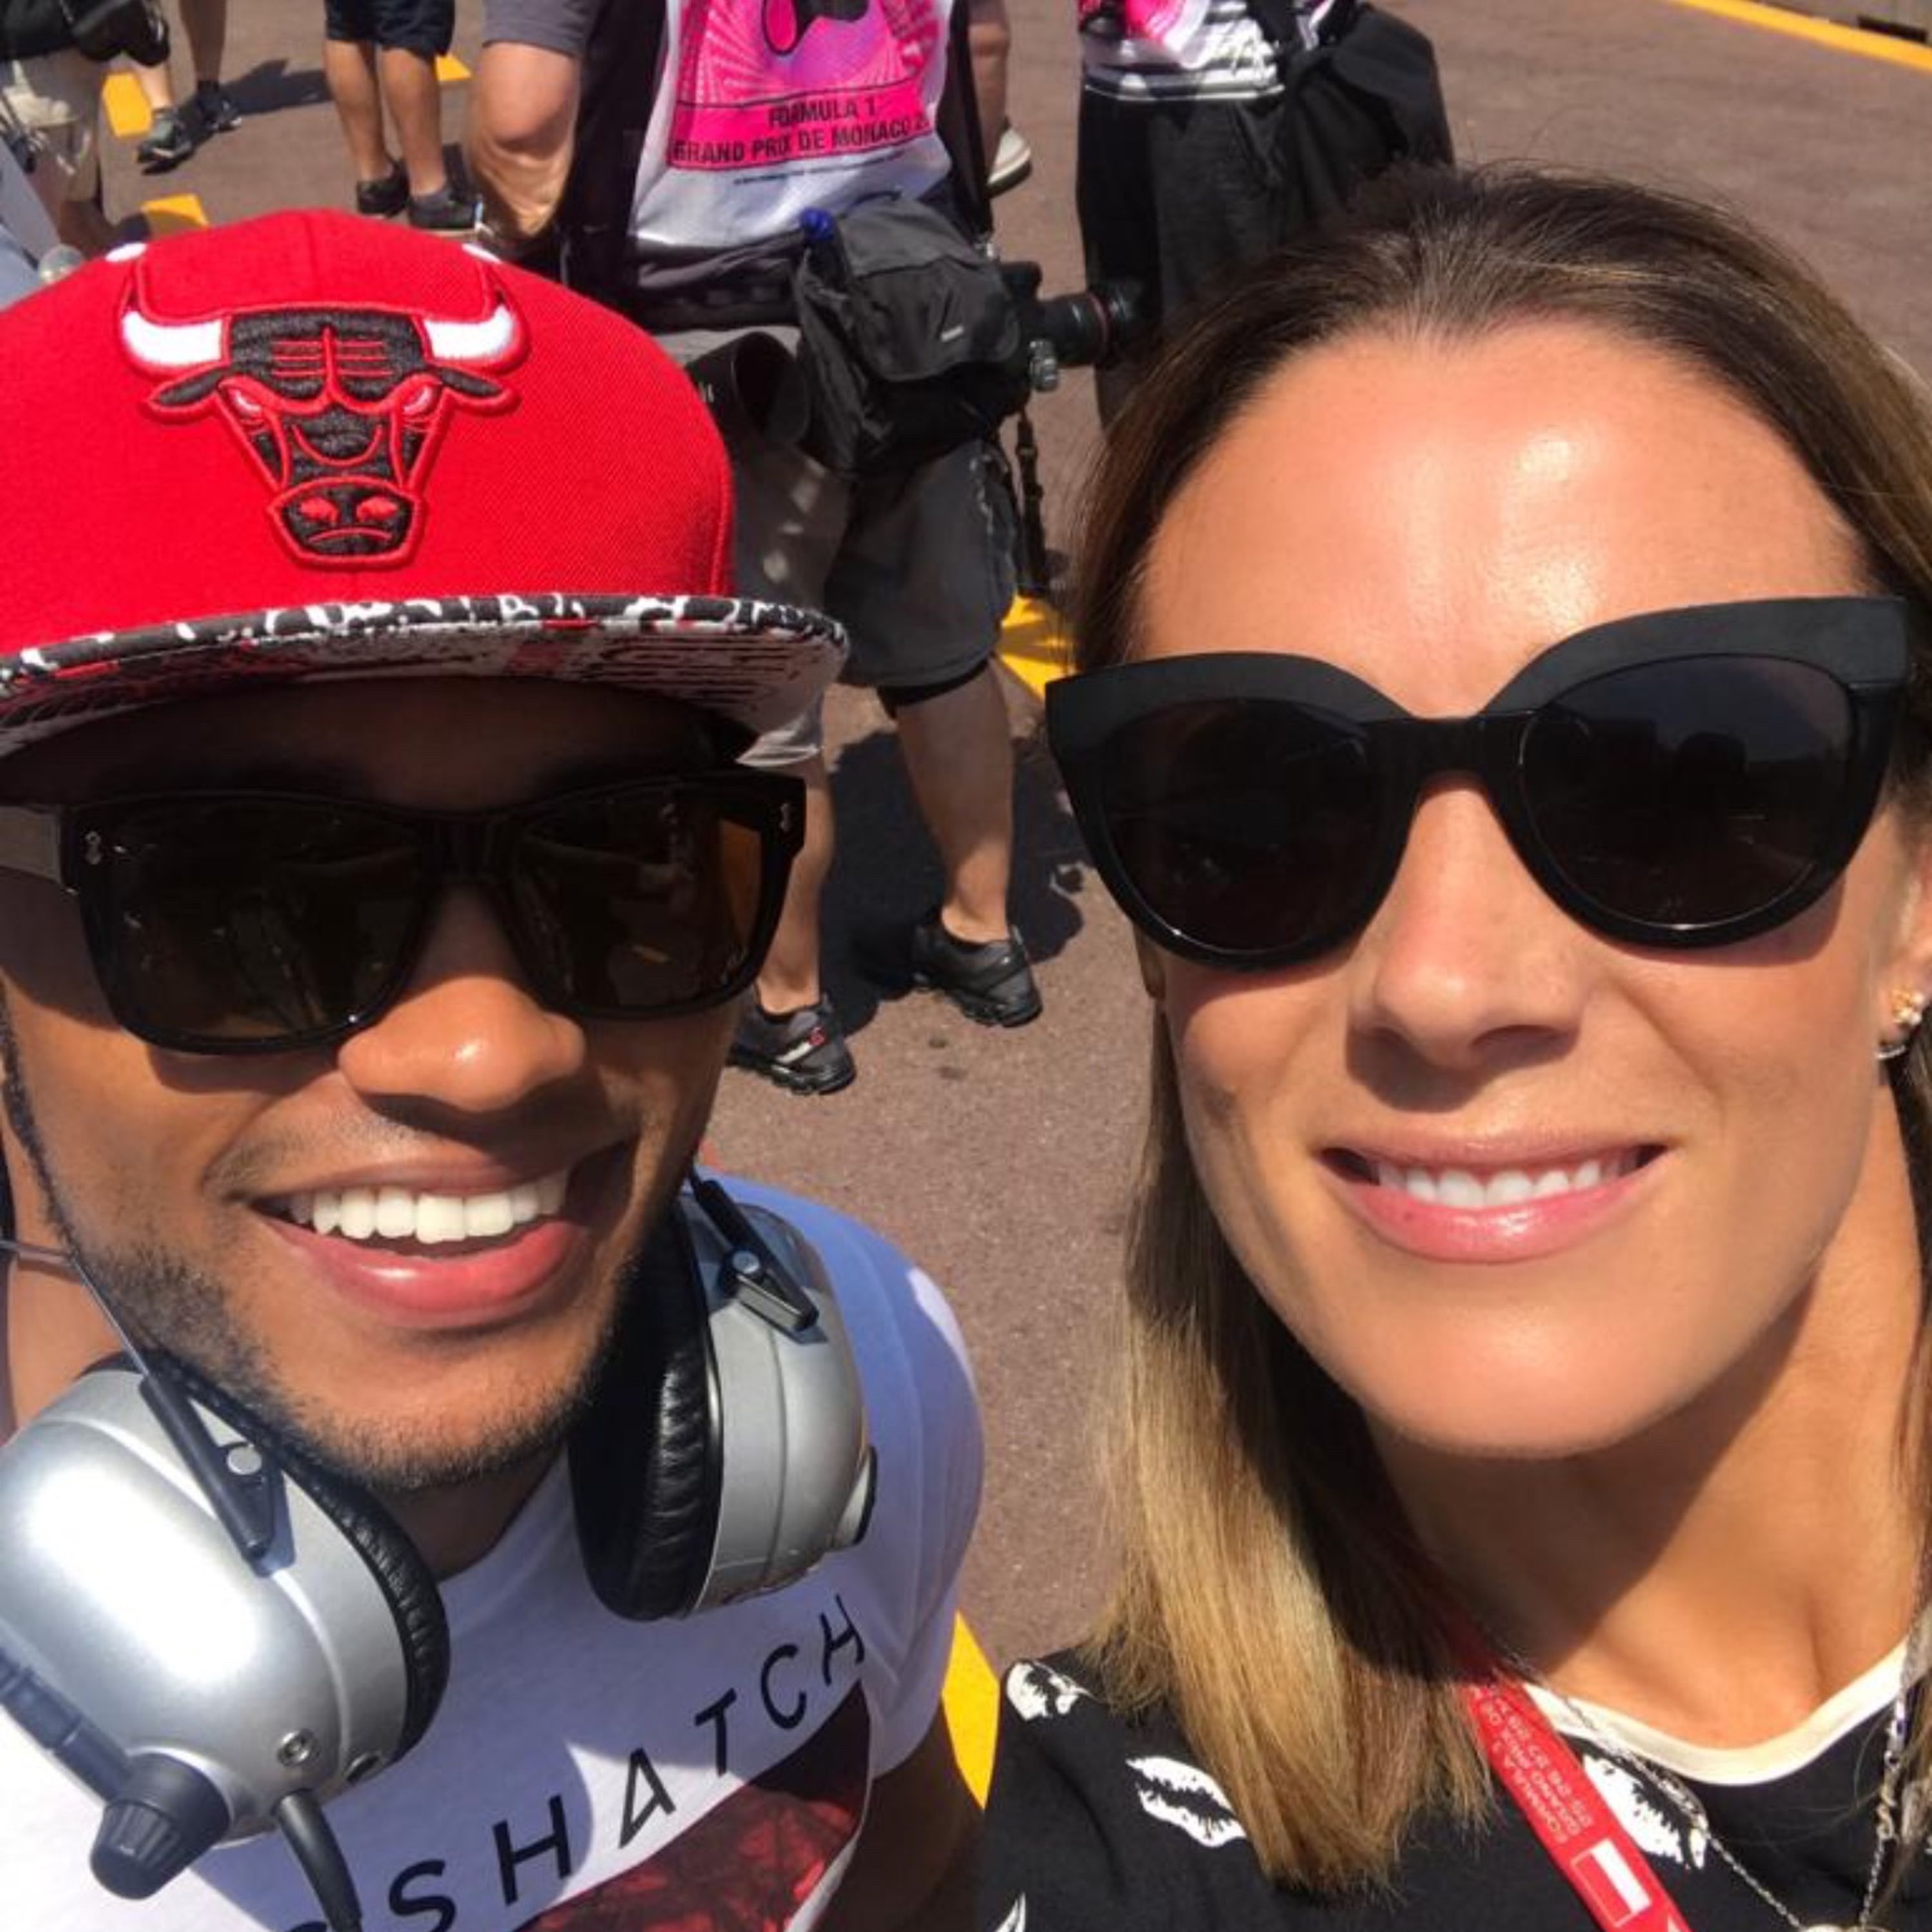 Full Episode: Nicolas Hamilton - From wheelchair to professional racing driver